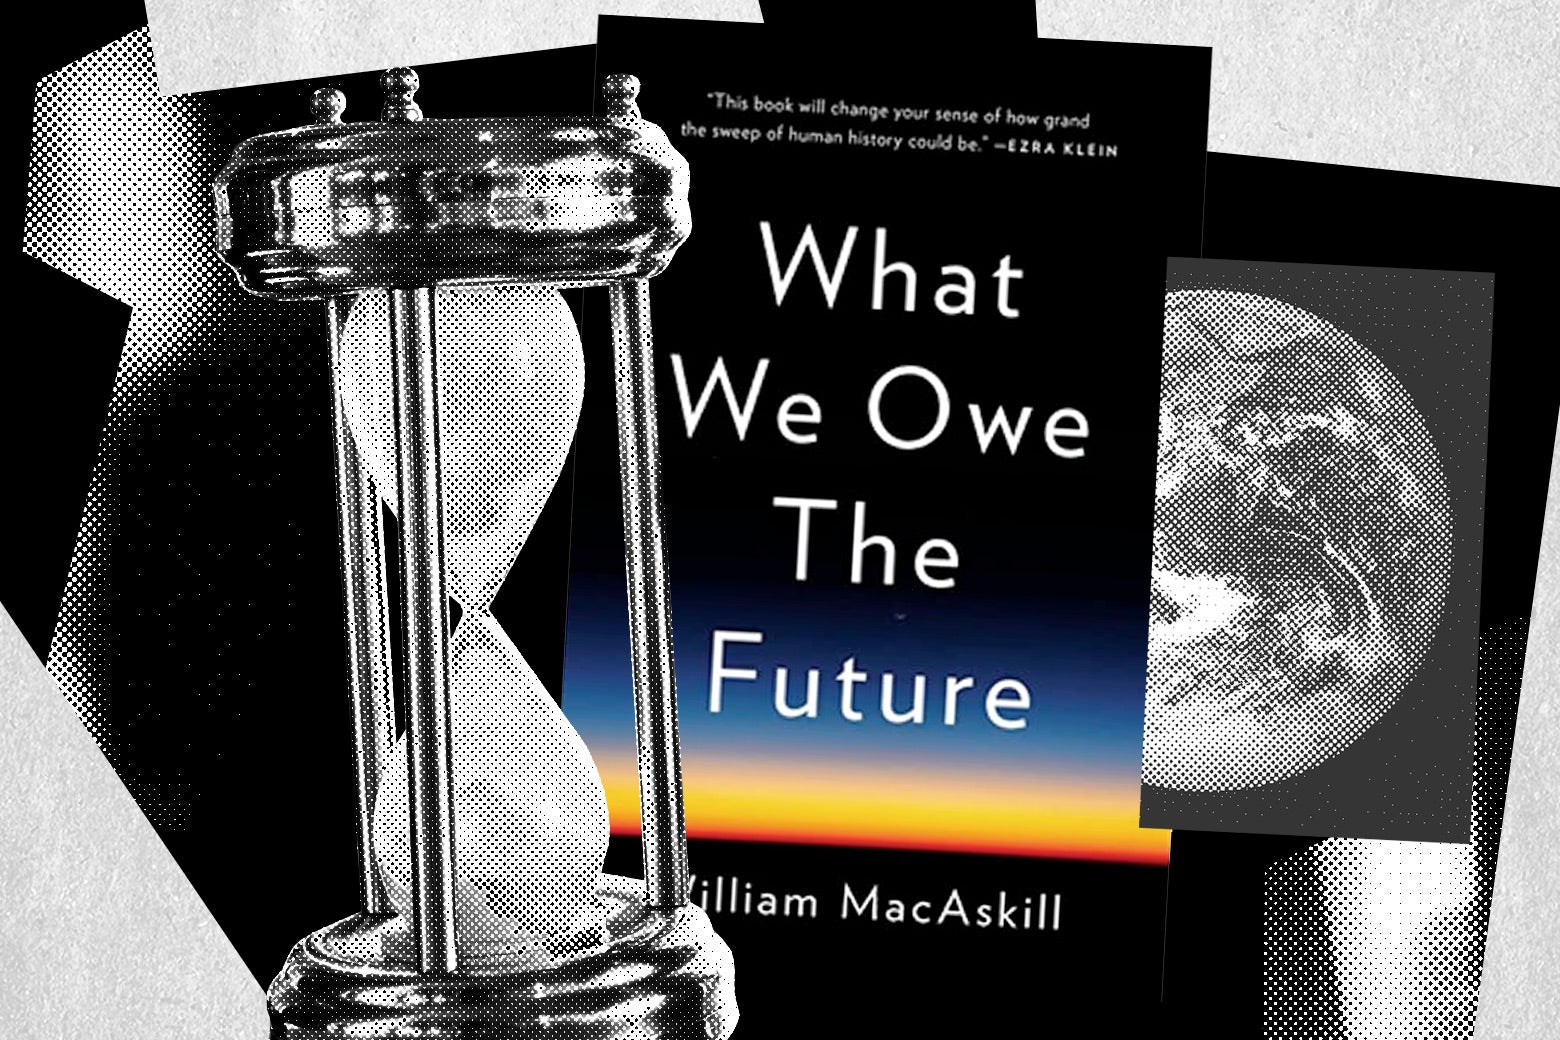 Collage of the earth, an hourglass, and the book cover of What We Owe The Future.